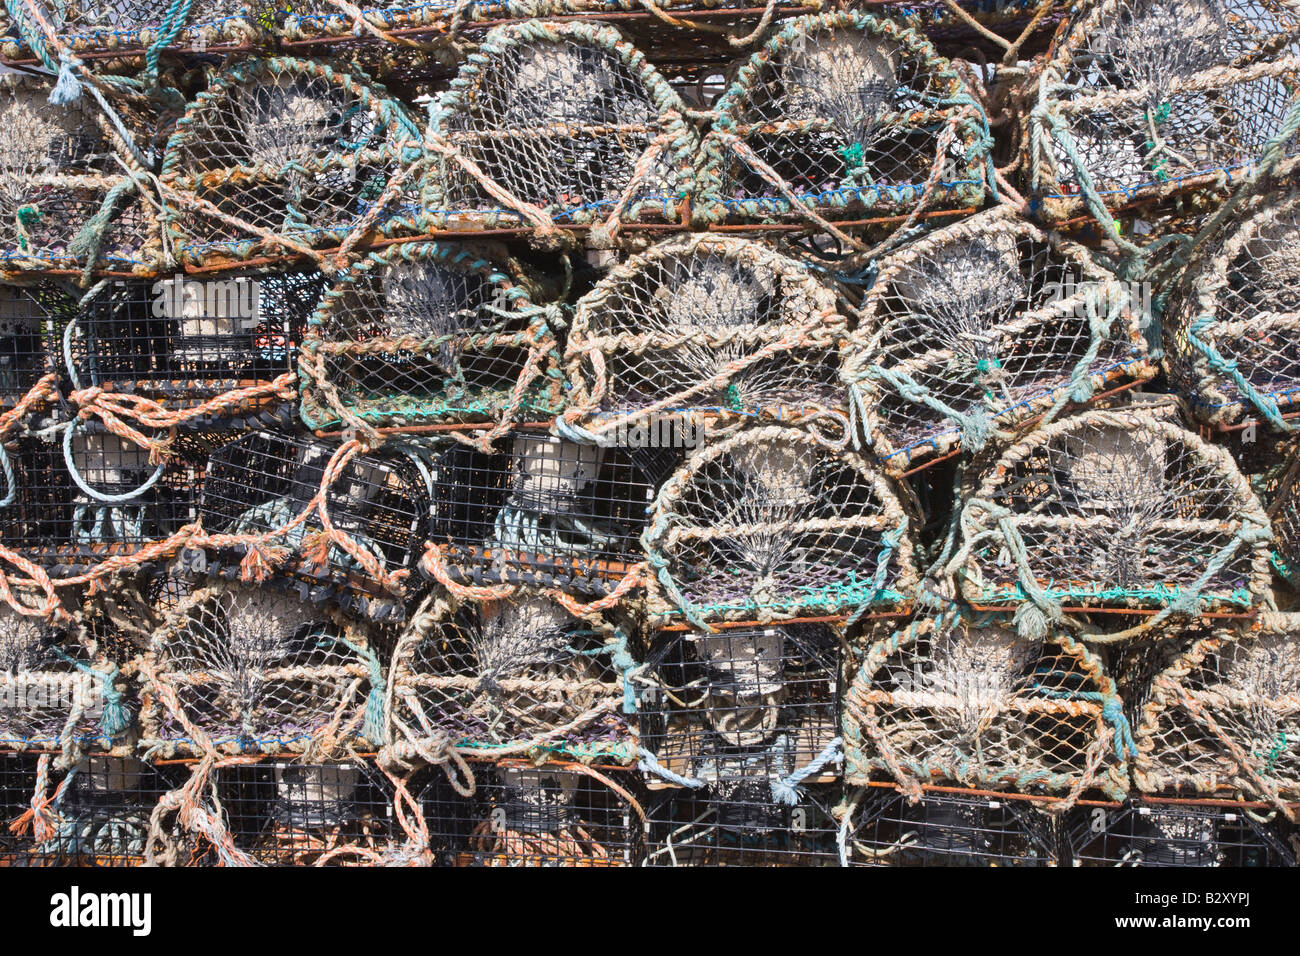 Lobster pots piled up on the beach Stock Photo